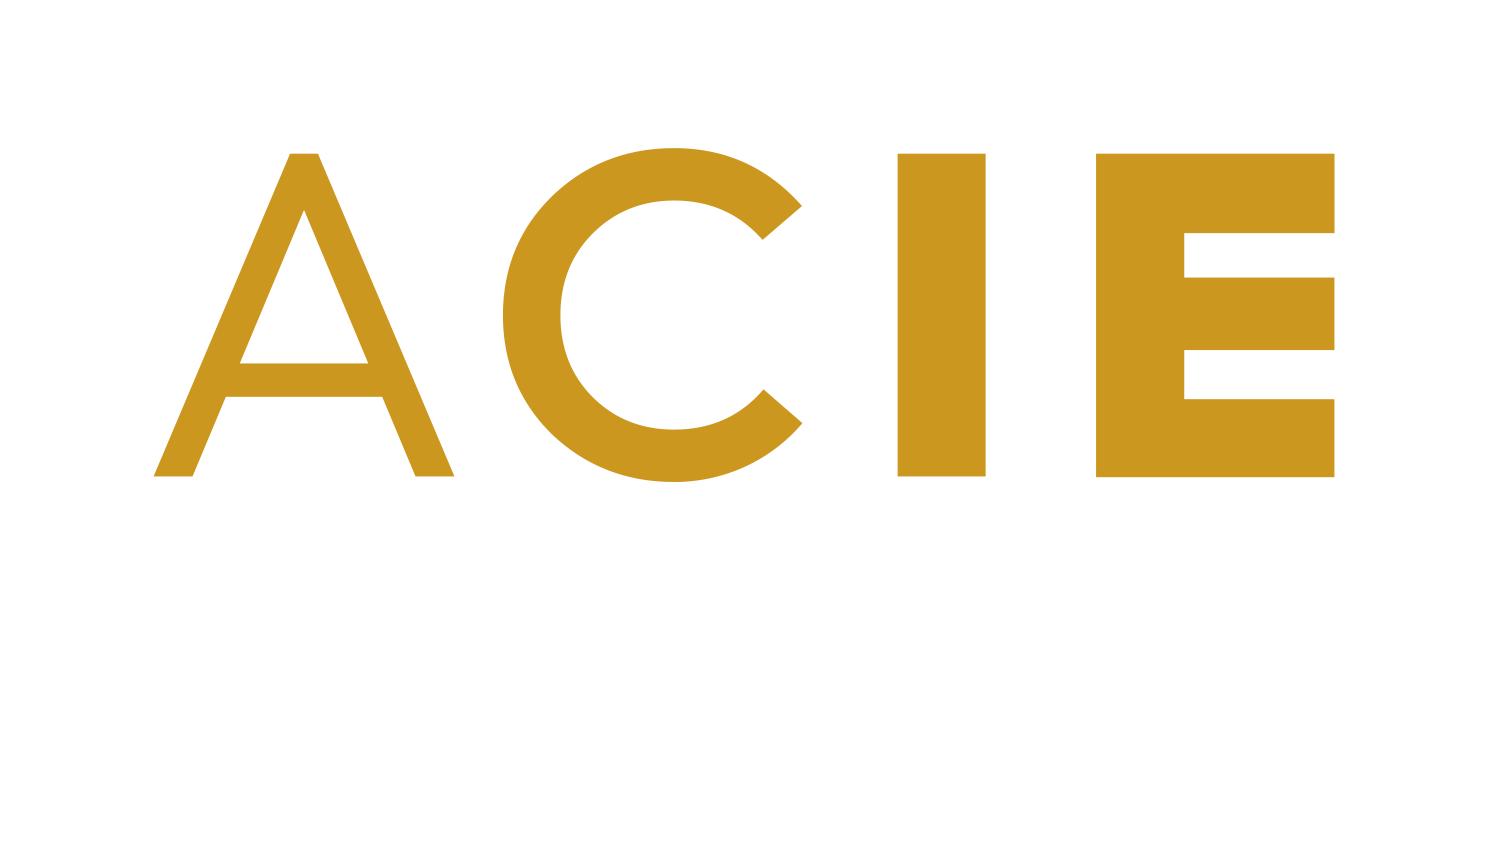 ACIE - Promoting excellence in charity independent examinatoins since 1999